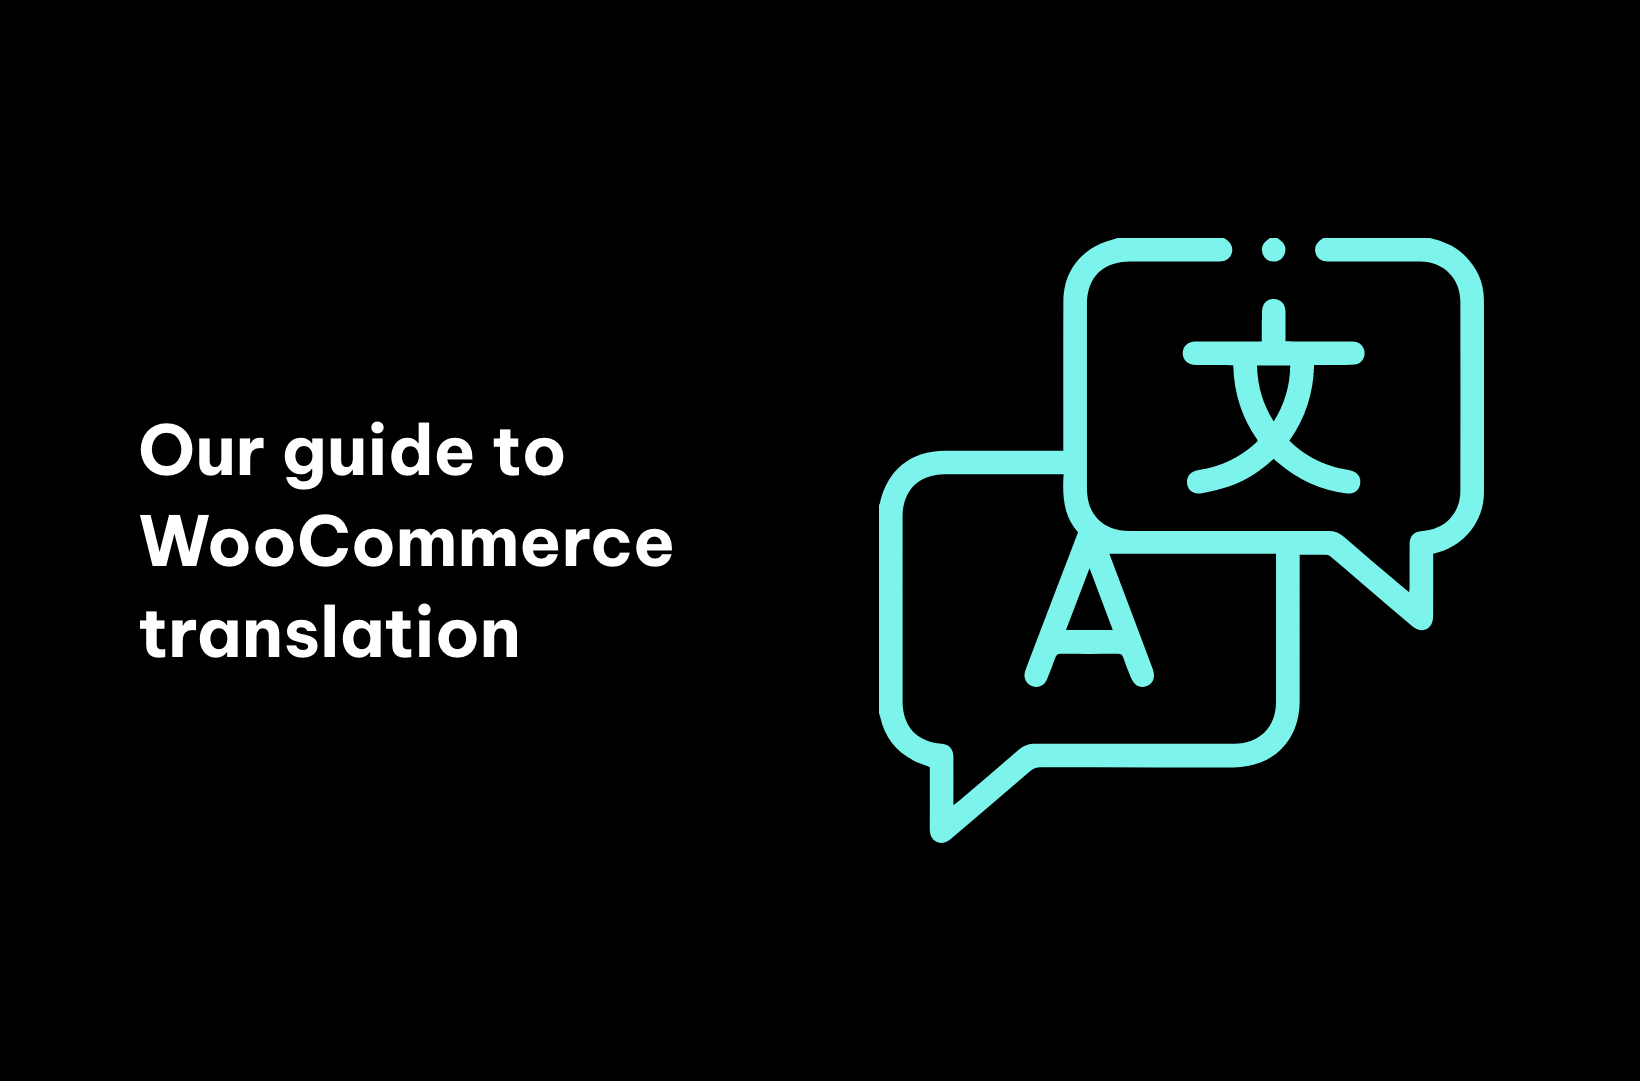 Our guide to WooCommerce translation